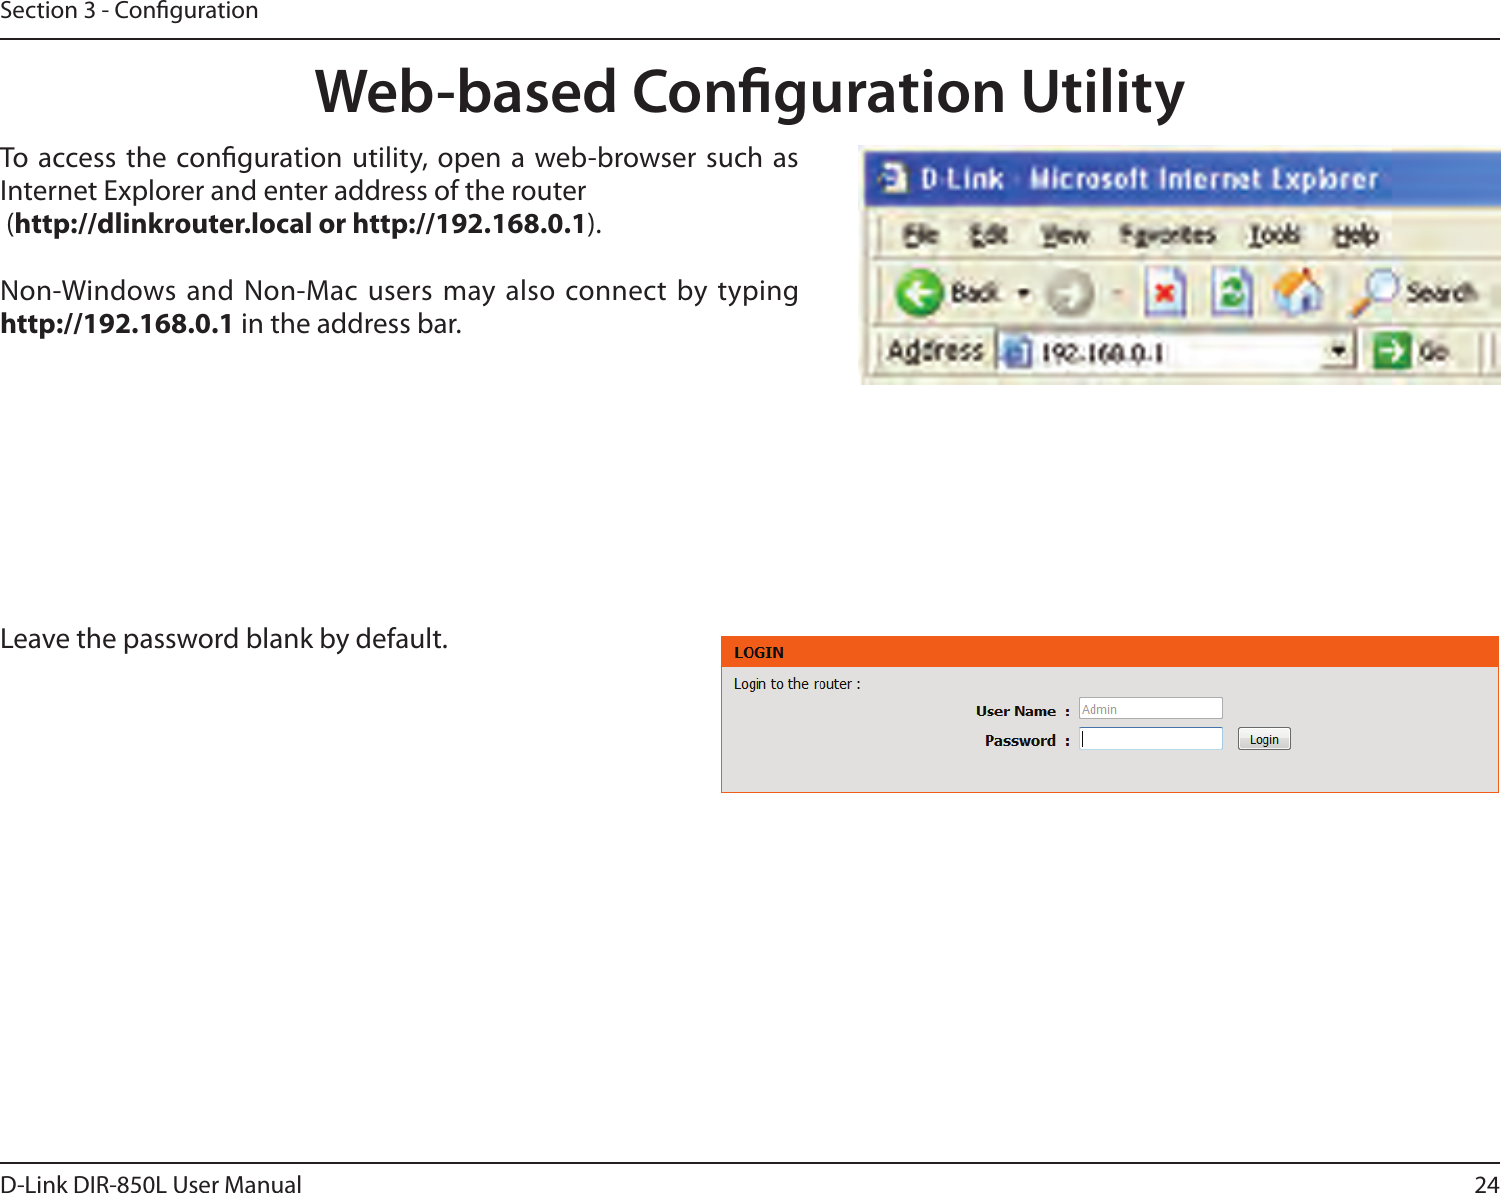 24D-Link DIR-850L User ManualSection 3 - CongurationWeb-based Conguration UtilityLeave the password blank by default.To  access the  conguration utility,  open a web-browser such as Internet Explorer and enter address of the router (http://dlinkrouter.local or http://192.168.0.1).Non-Windows and  Non-Mac users  may also connect  by typing http://192.168.0.1 in the address bar.